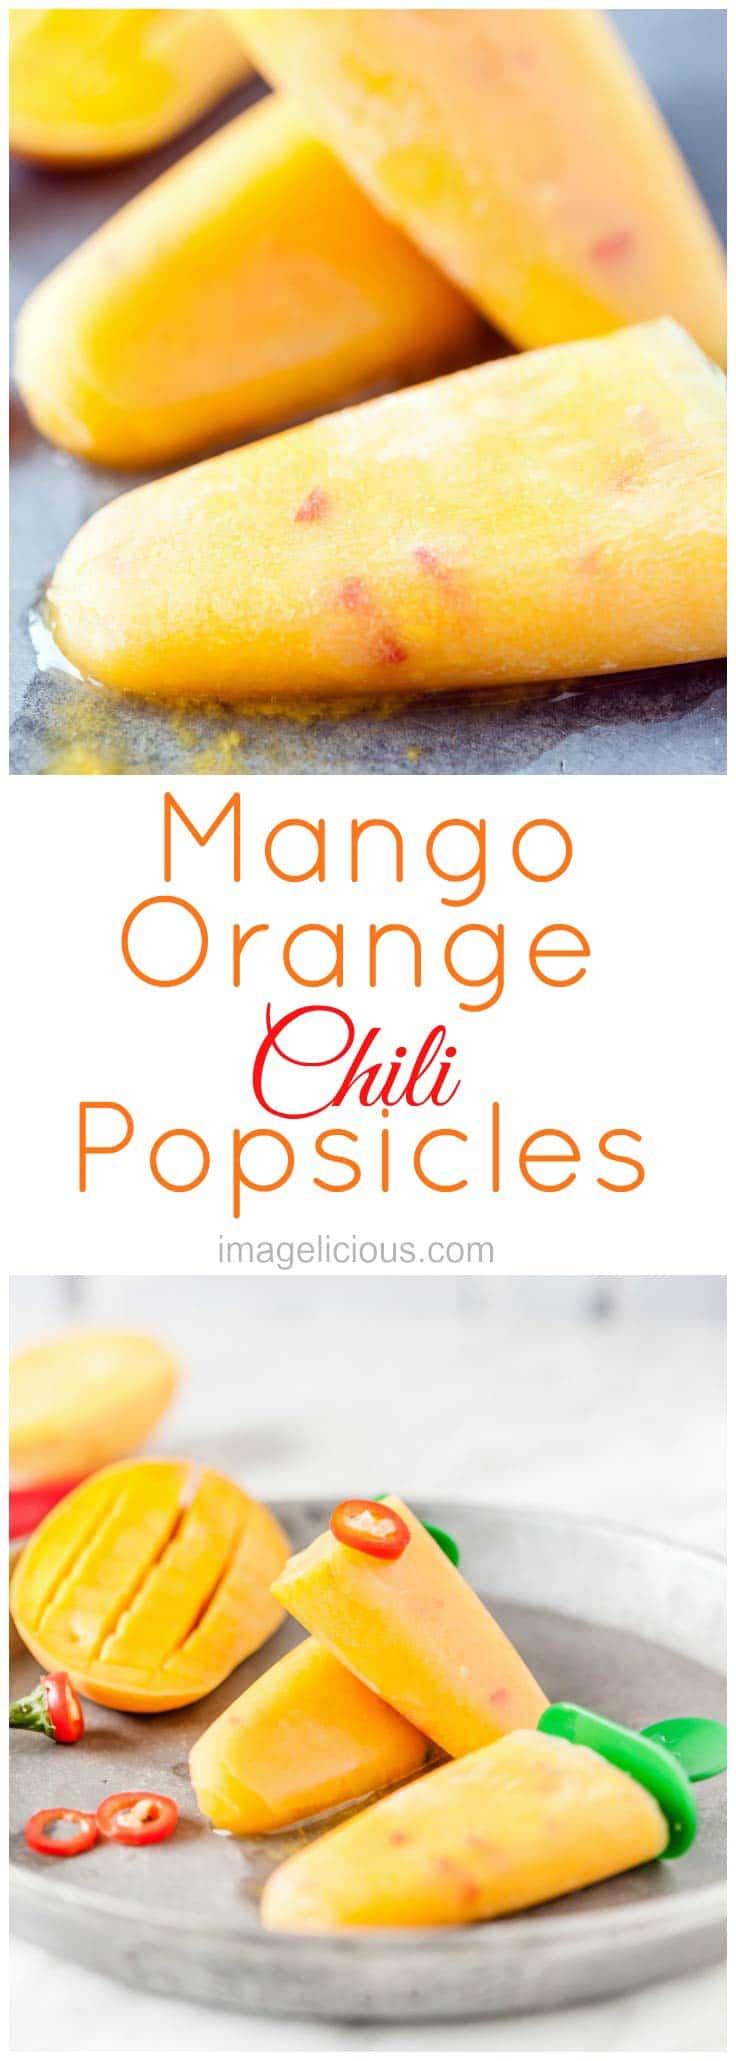 Mango Orange Chili Popsicles are sweet, spicy, and refreshing. Great way to cool down in the summer. Chili pepper adds a fine spicy note to sweet fruit. Naturally sweet, vegan, raw, gluten-free | Imagelicious